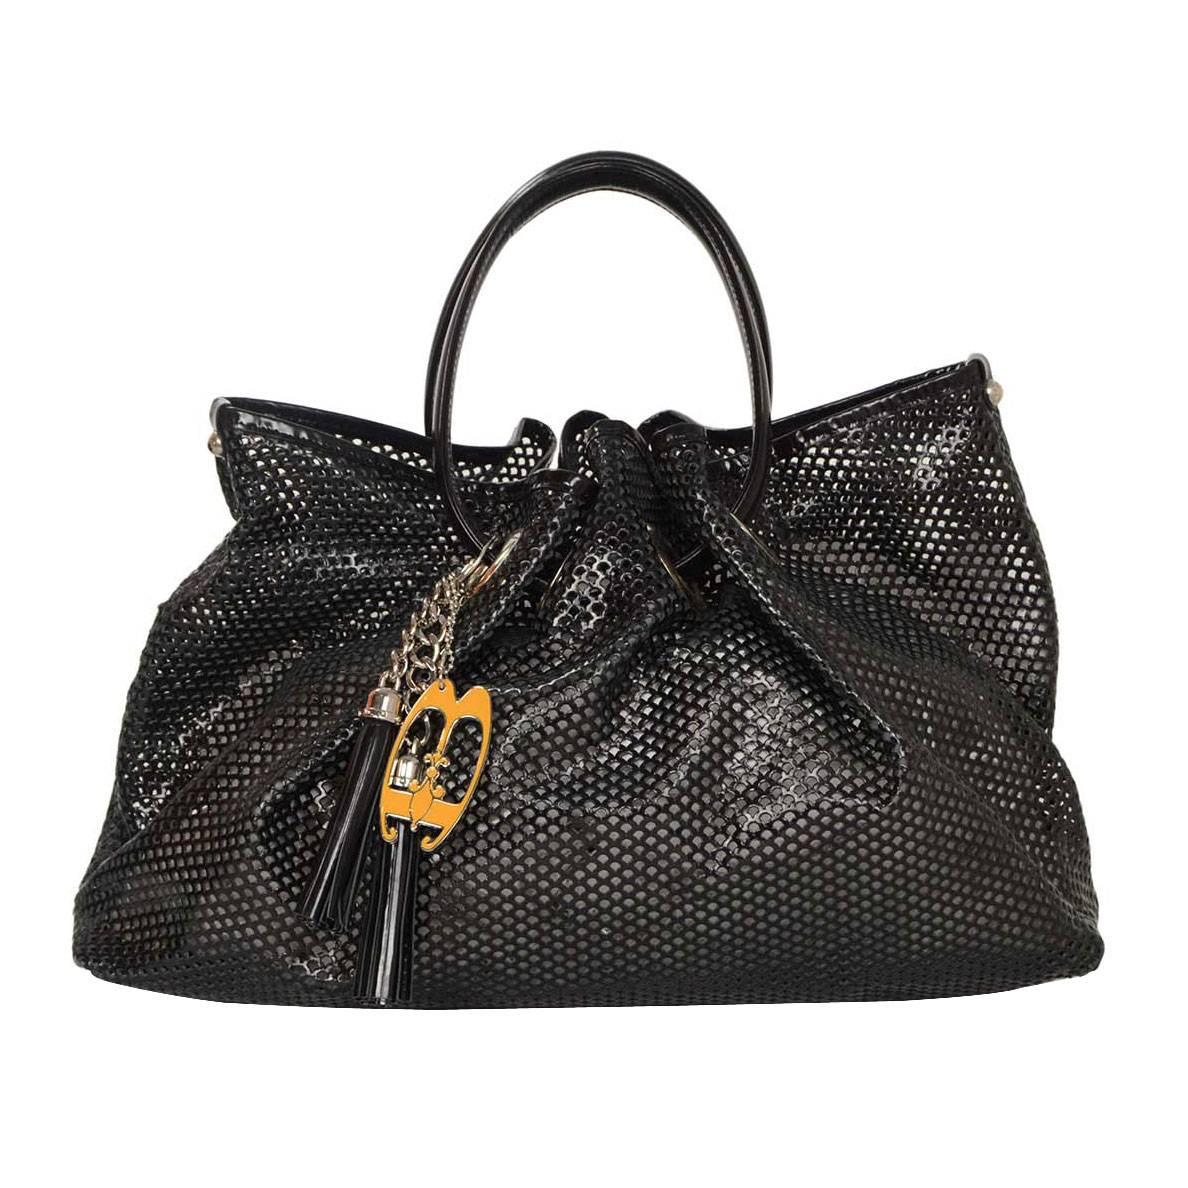 Braccialini Black Perforated Leather Gathered Tote Bag SHW